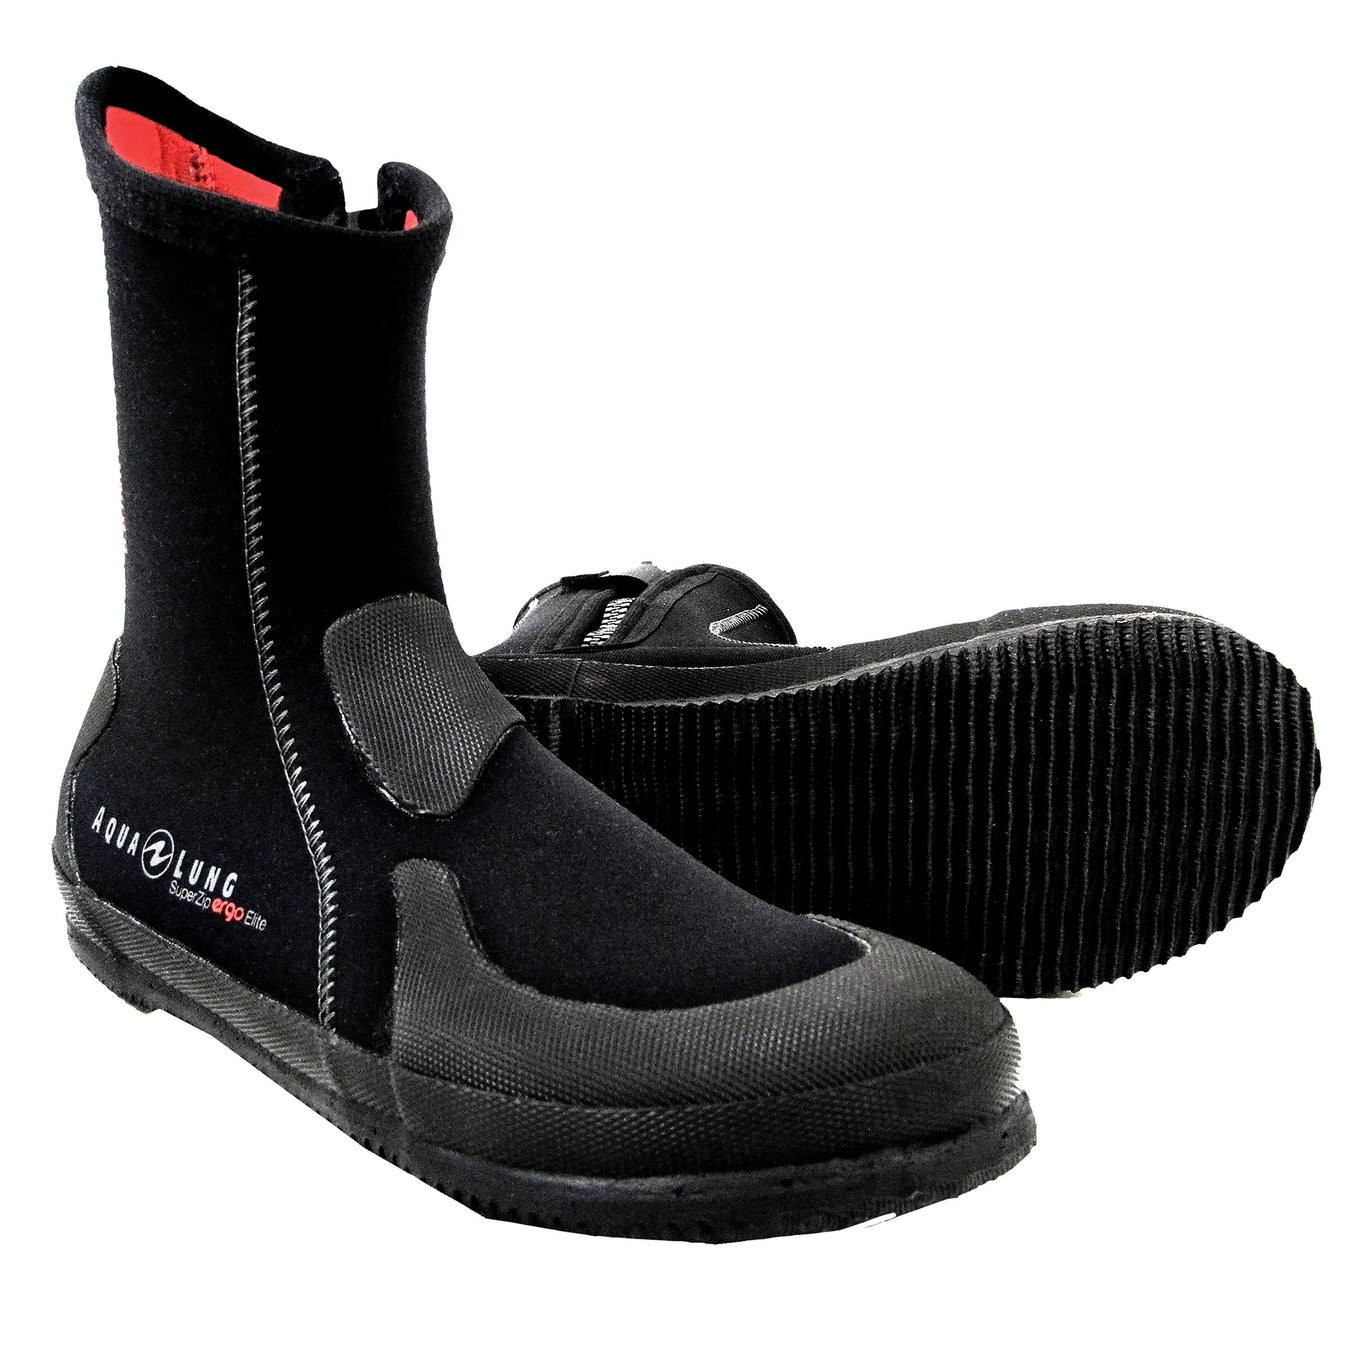 Wetsuit Boots and Scuba Diving Booties